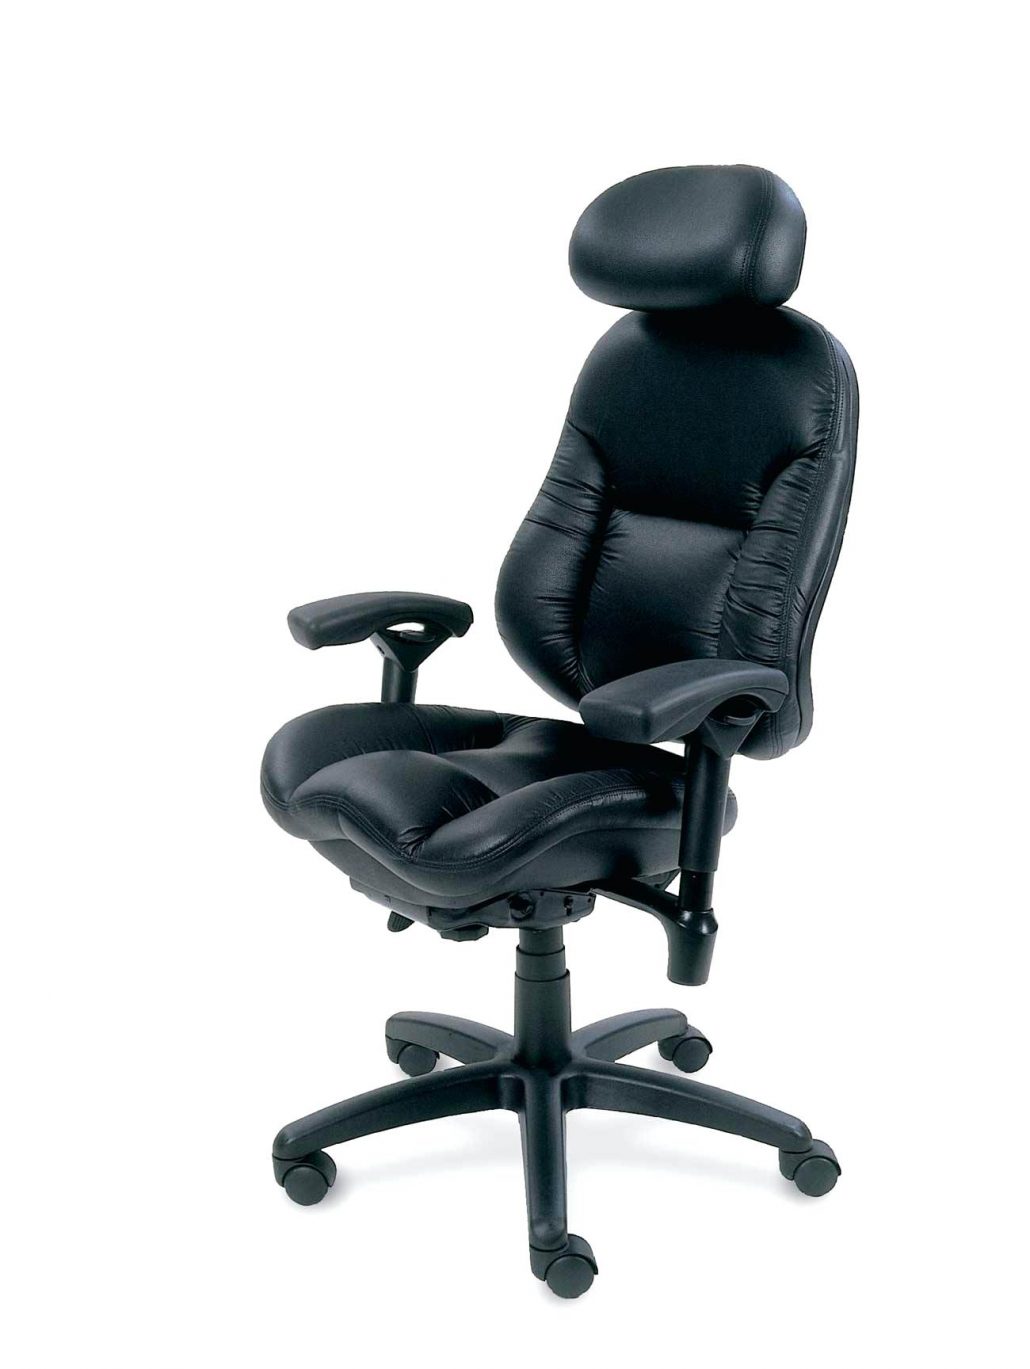 best home chair for lower back pain